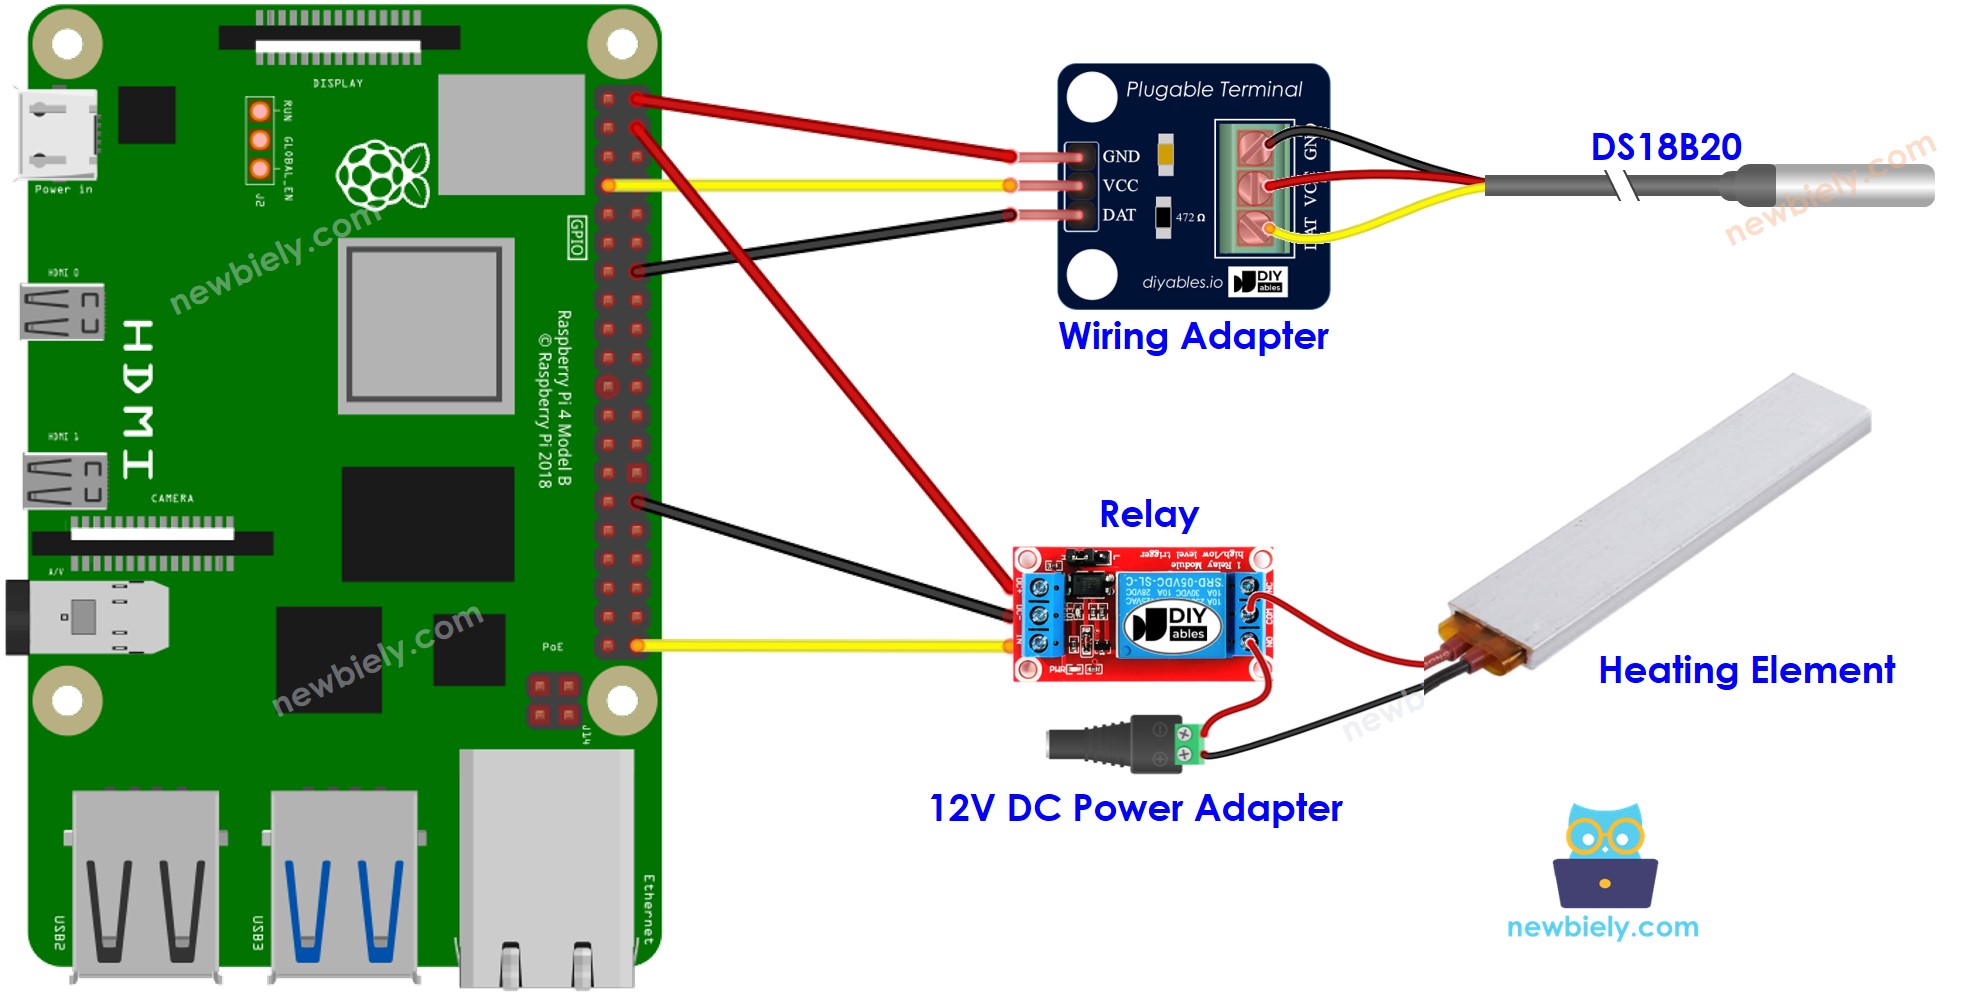 The wiring diagram between Raspberry Pi and heating system